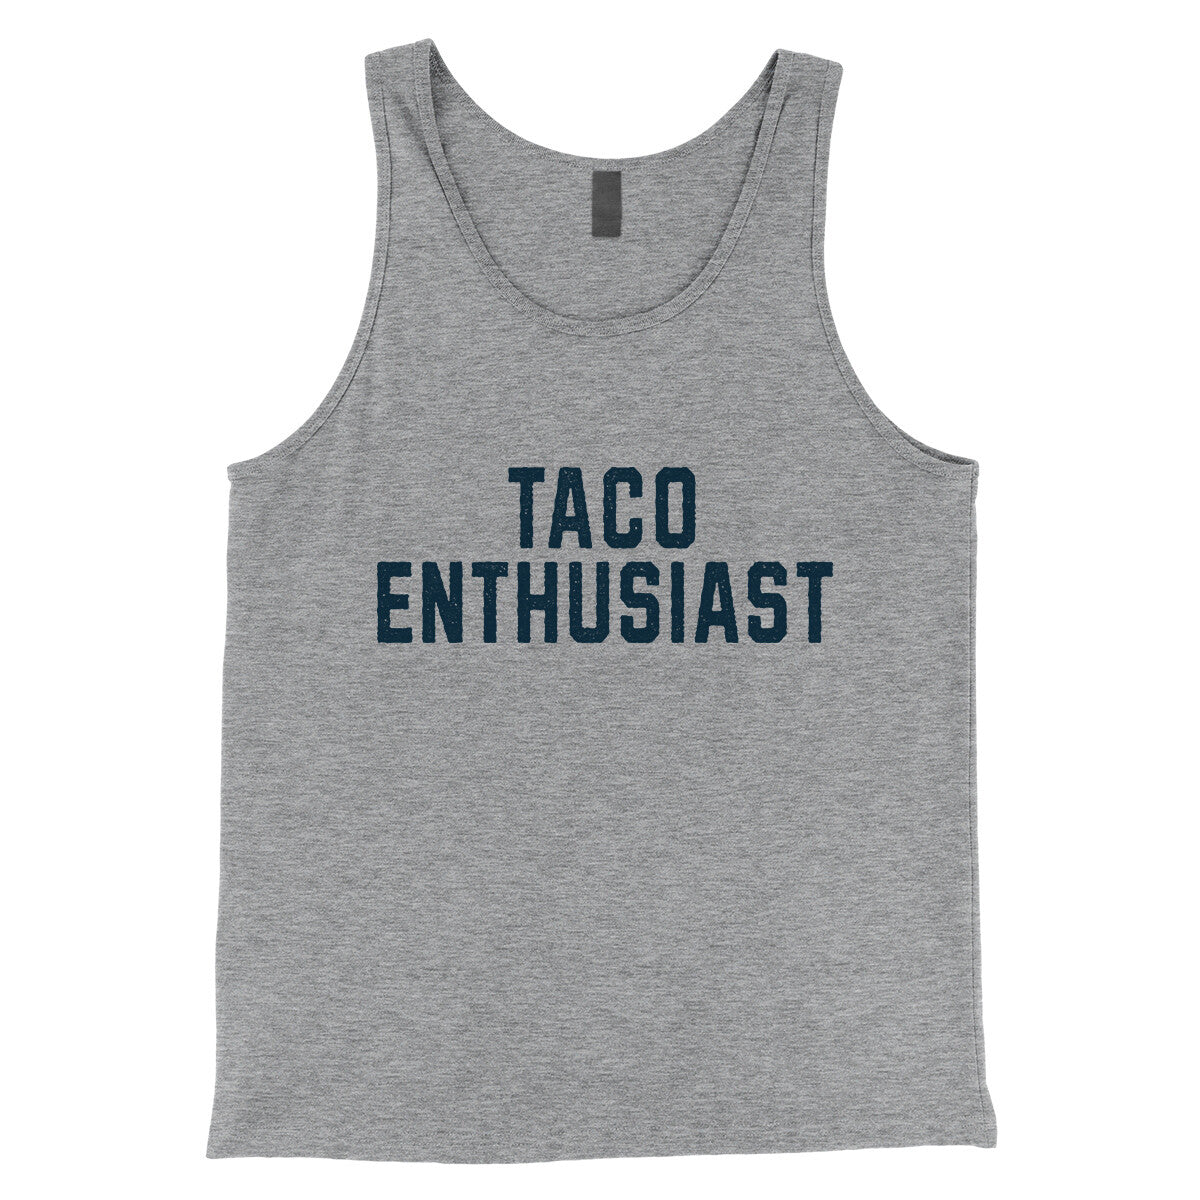 Taco Enthusiast in Athletic Heather Color